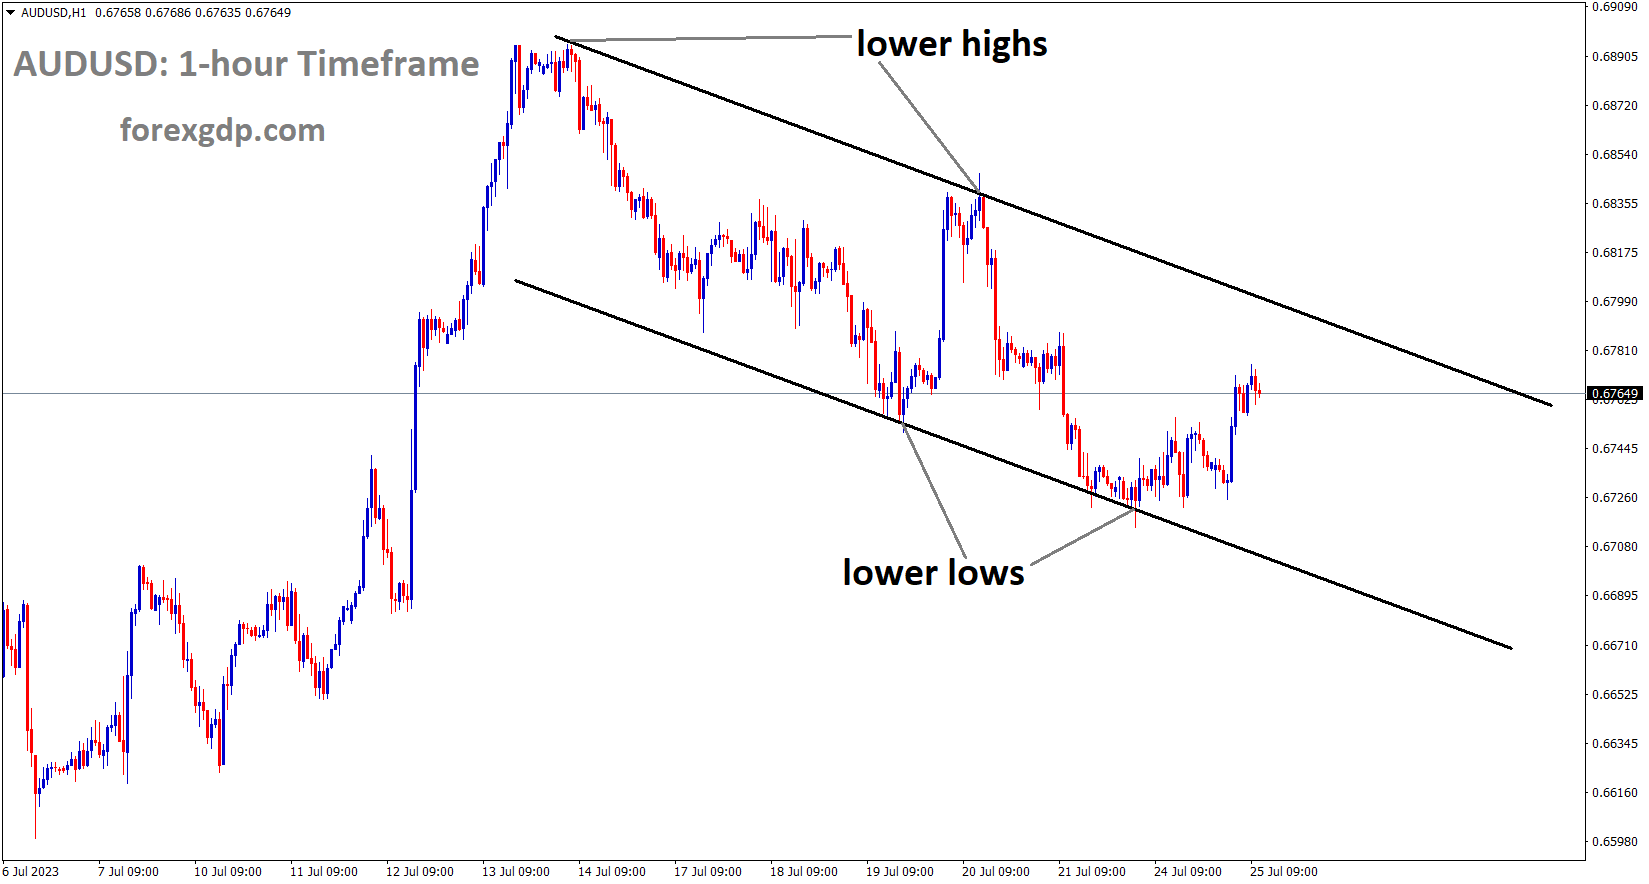 AUDUSD is moving in the Descending channel and the market has rebounded from the lower low area of the channel 1